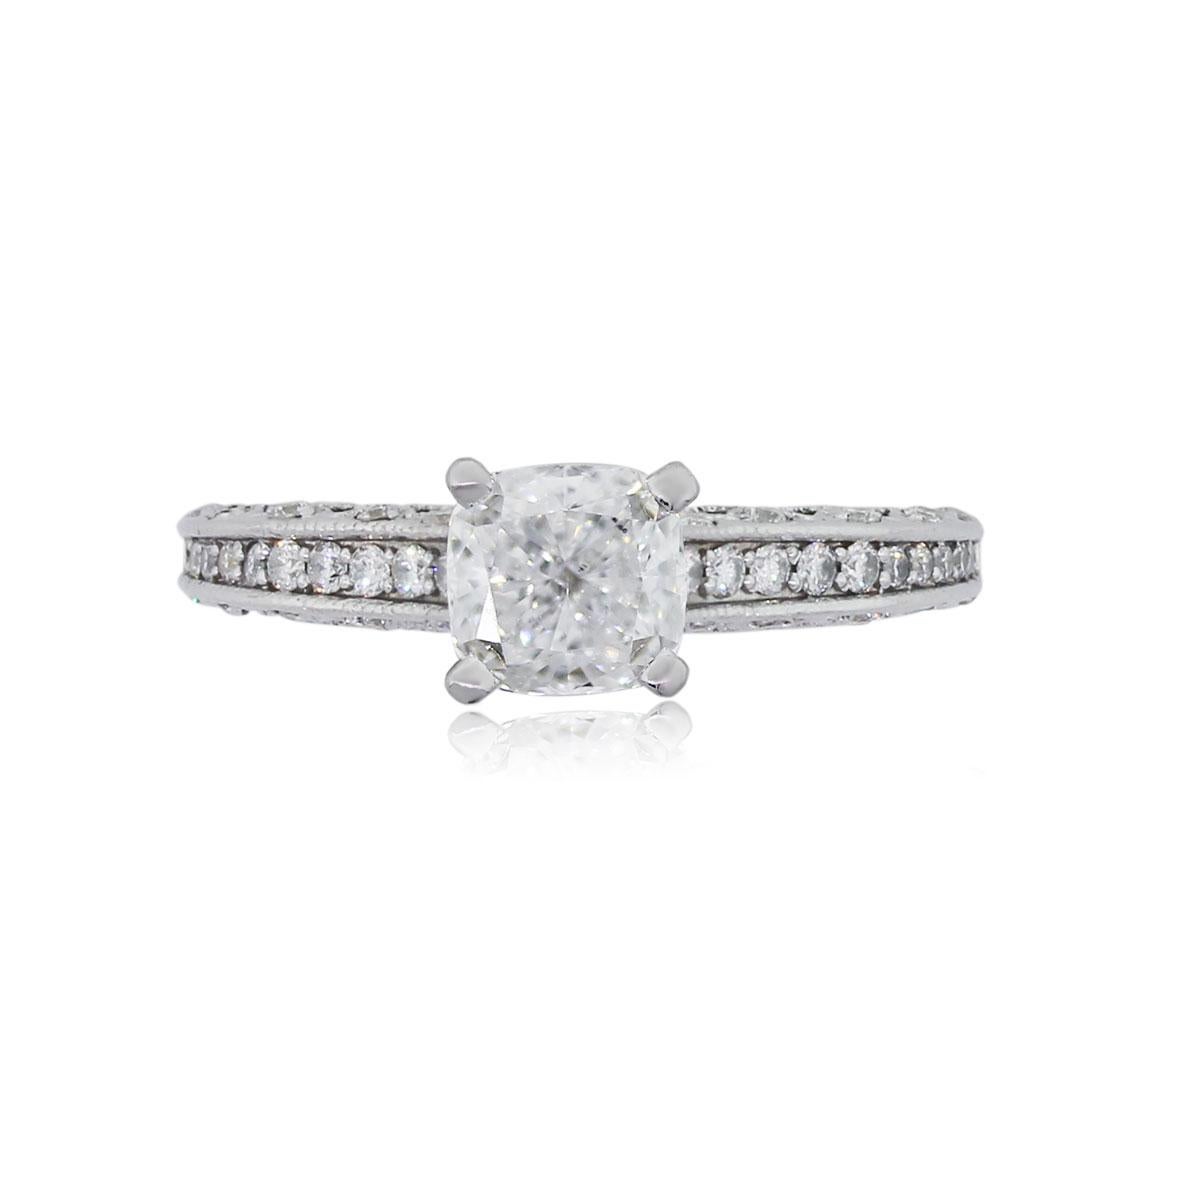 Material: 14k White Gold
Engagement Ring Diamond Details: GIA certified 0.84ct cushion cut diamond, diamond is D in color and VS2 in clarity. Mounting has approximately 0.50ctw of round brilliant diamonds. Diamonds are G in color and VS2 in